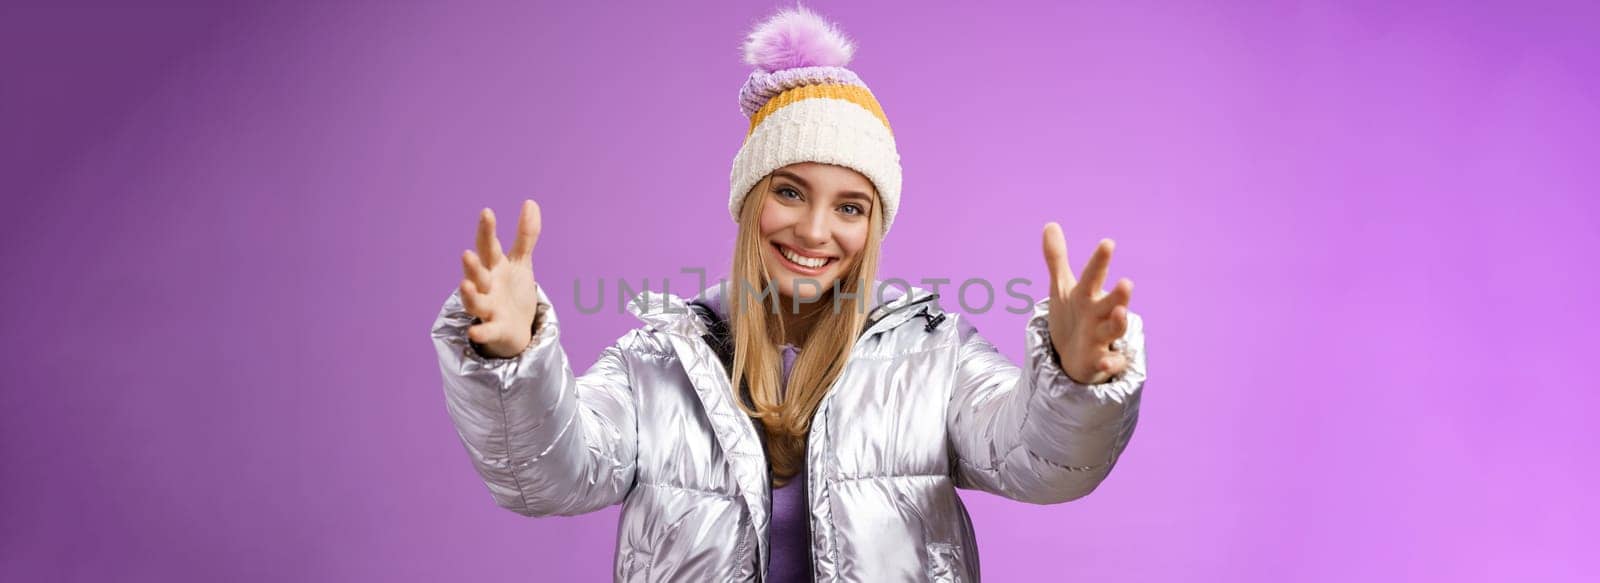 Lifestyle. Friendly romantic joyful charming blond european woman asking boyfriend come give hug tilting head happily smiling extend arms forward cuddle wanna embrace loving person snowy mountain travel.